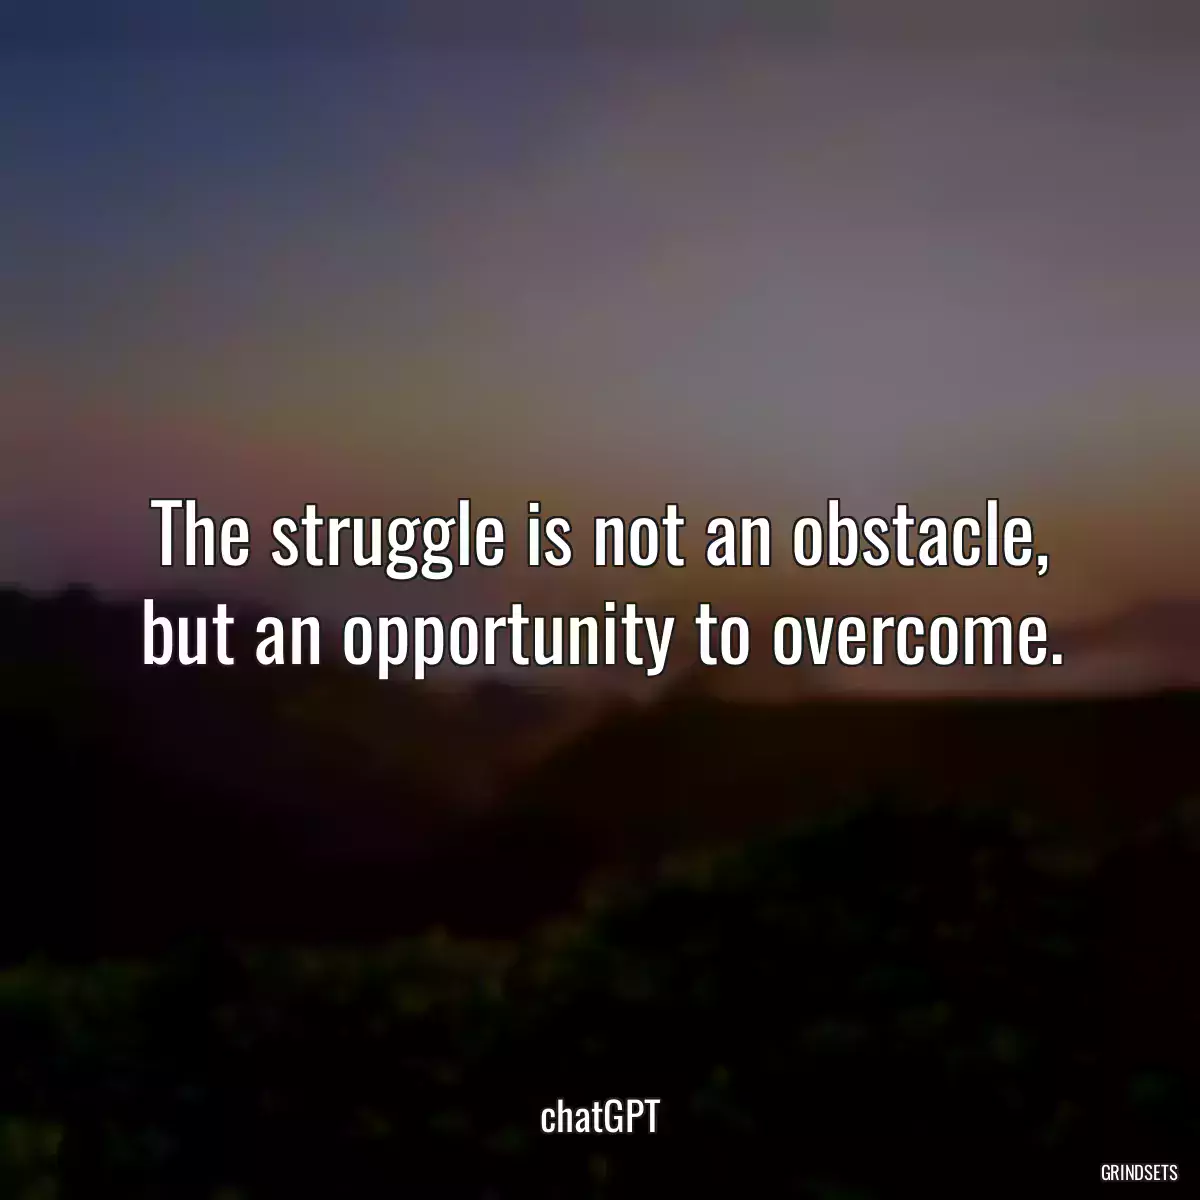 The struggle is not an obstacle, but an opportunity to overcome.